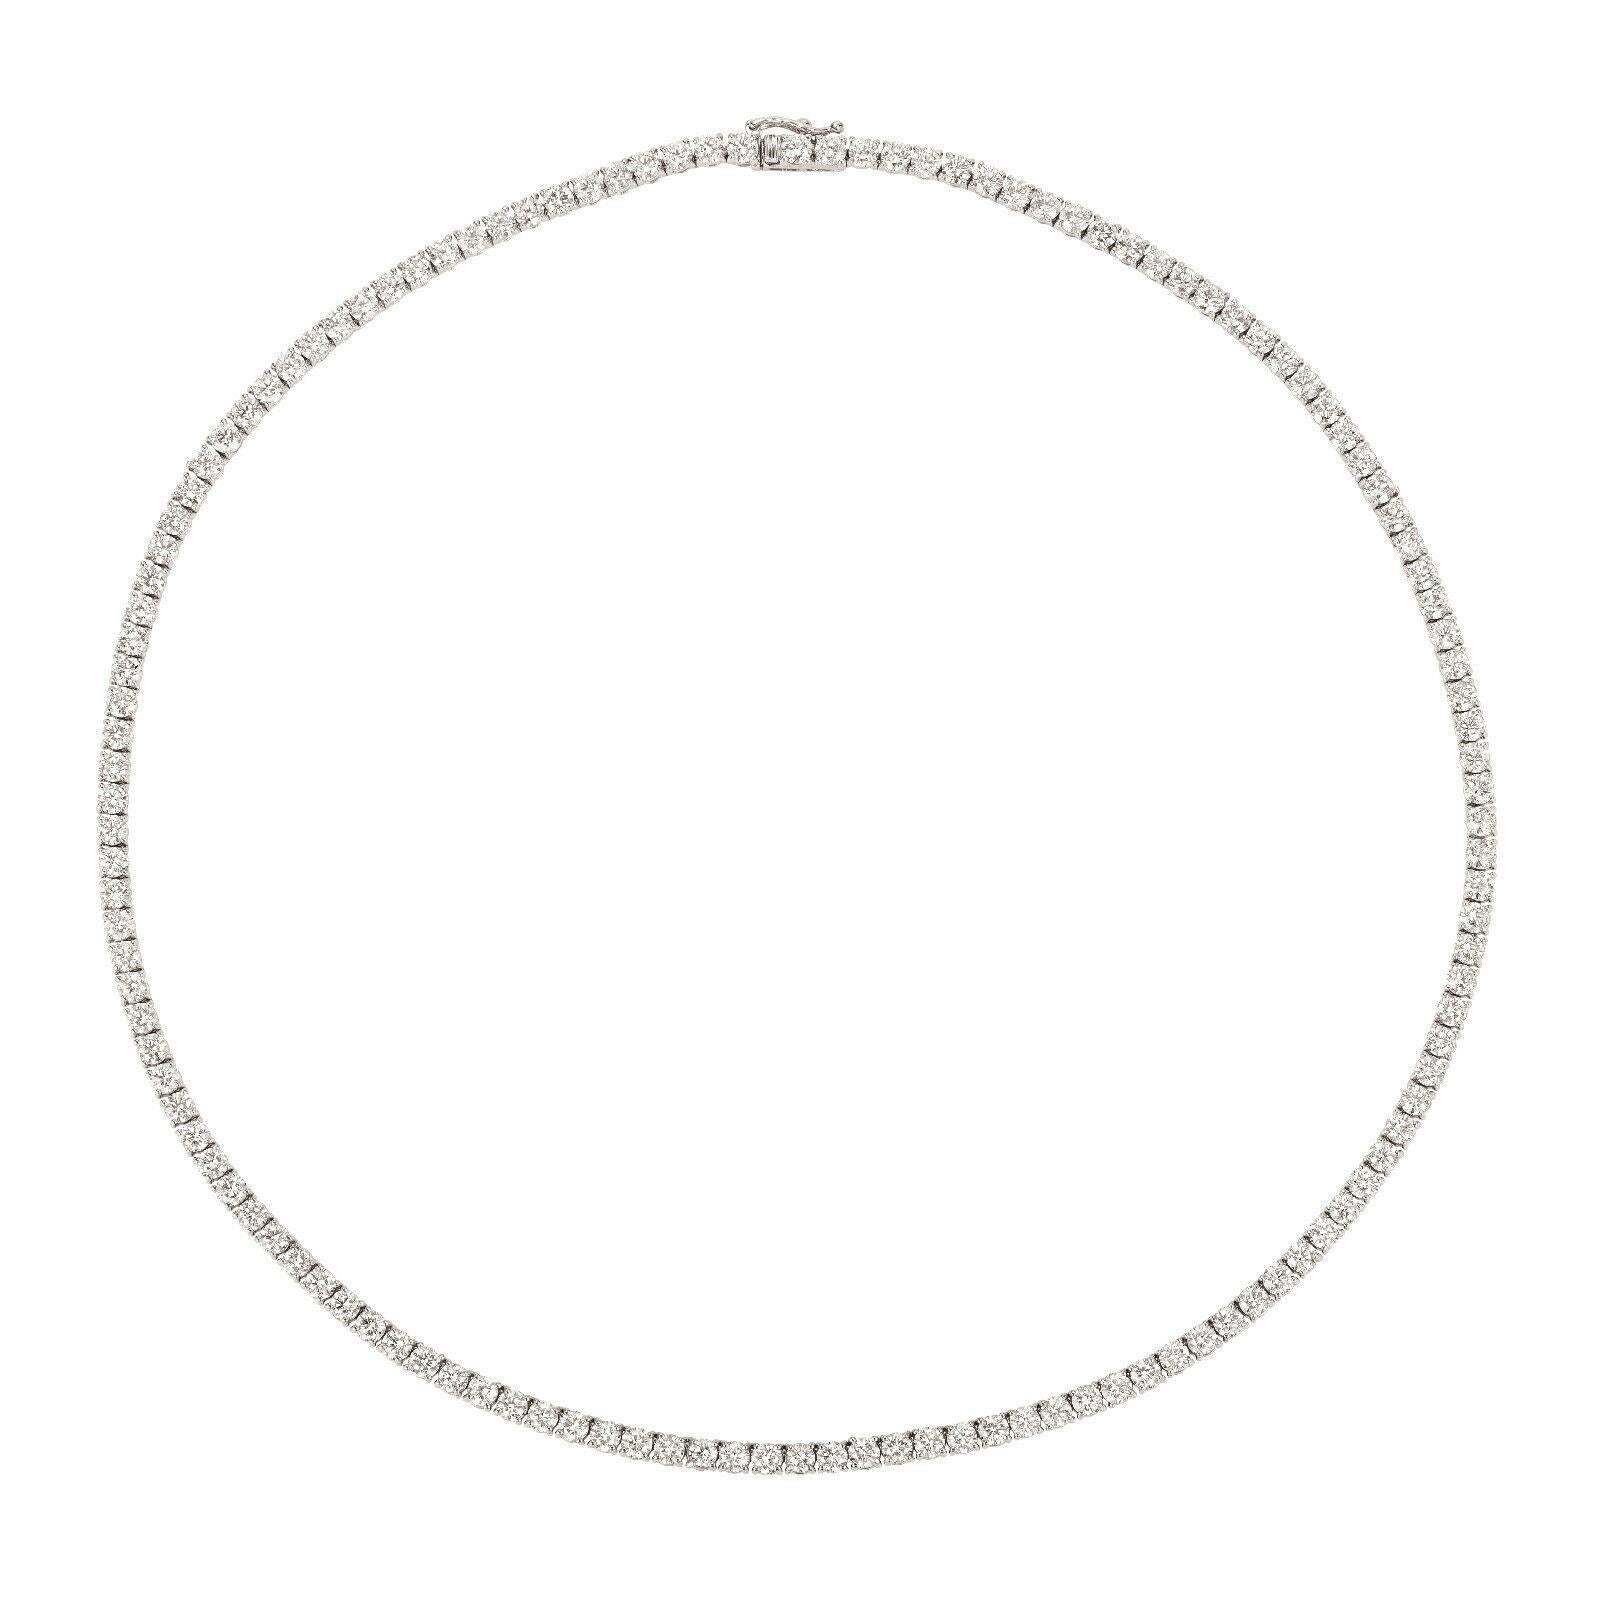 13.50 Carat Diamond Tennis Necklace G SI 14K White Gold 16 inches

100% Natural Diamonds, Not Enhanced in any way Round Cut Diamond  Necklace  
13.50CT
G-H 
SI  
14K White Gold, Pave style, 15.9 gram
16 inches in length, 1/8 inch in width
130